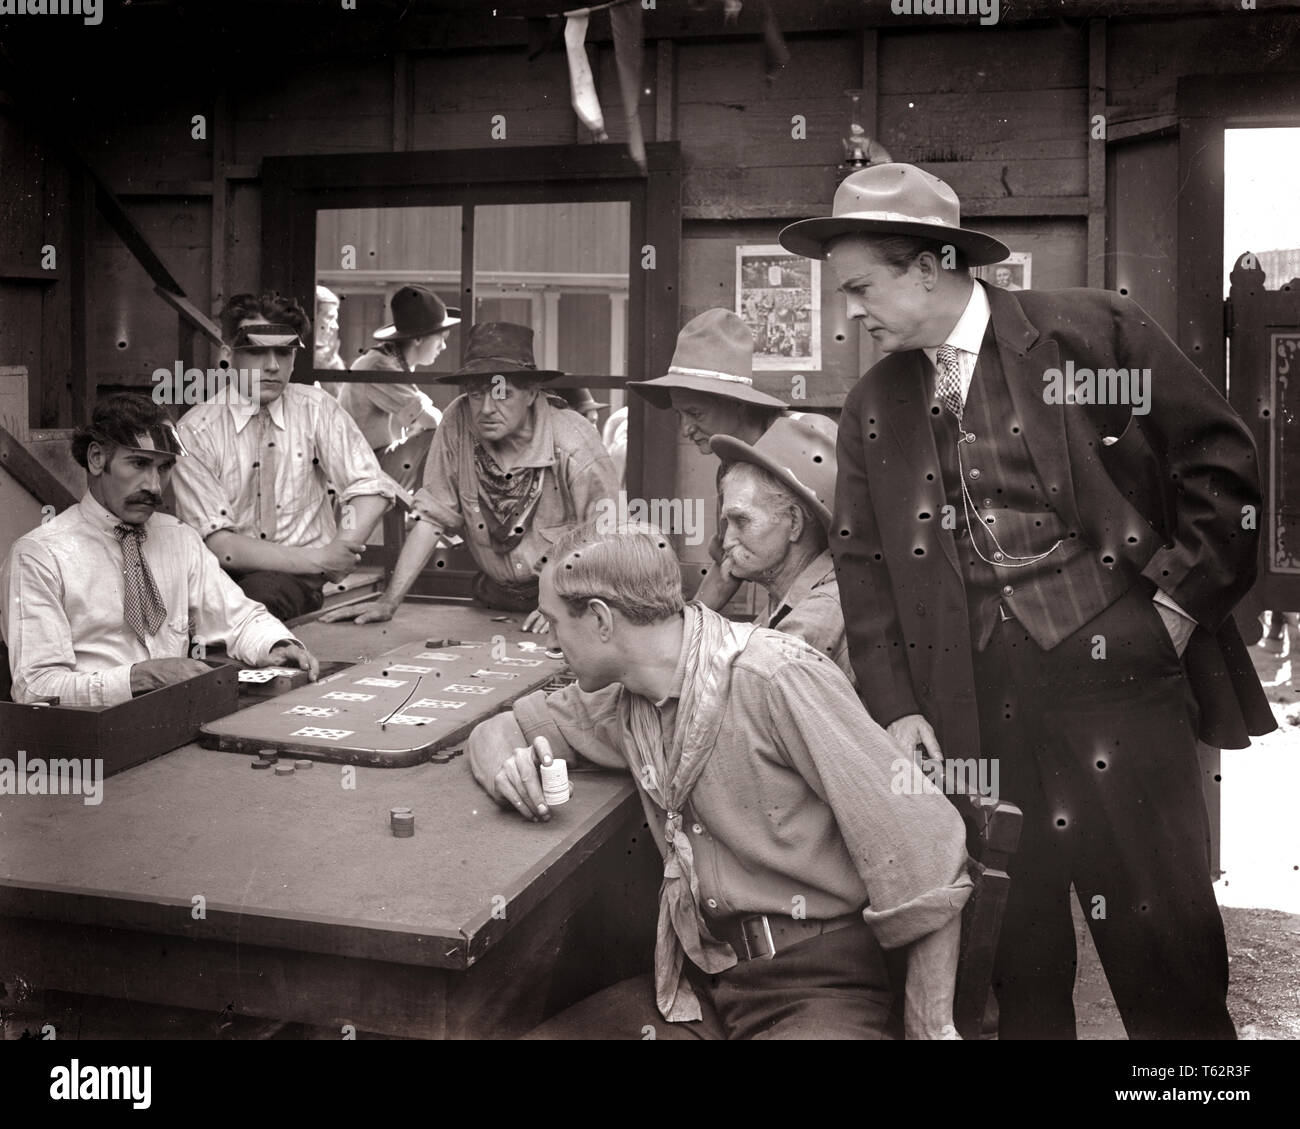 1890s 1900s 1910s FARO CARD GAME MEN PLAYING GAMBLING IN OLD WILD WEST SALOON silent movie still uncorrected glass plate - asph106 ASP001 HARS WILD WEST LIFESTYLE ACTOR HISTORY STUDIO SHOT COPY SPACE HALF-LENGTH PERSONS DANGER MALES RISK WESTERN ENTERTAINMENT DEALER ACTING PLAYERS B&W MOVIES COWBOYS FREEDOM GAMBLING LUCK POKER TURN OF THE 20TH CENTURY CHOICE DRAMATIC EXCITEMENT LUCKY FILM STILLS IN OF SALOON FILM STILL UNLUCKY ACTORS DRAMA GAMBLE SILENT MOVIE GAMBLERS MOTION PICTURE PUBLICITY STILL STILLS MOVIE STILL BET BLACK AND WHITE CAUCASIAN ETHNICITY CHANCE OLD FASHIONED Stock Photo